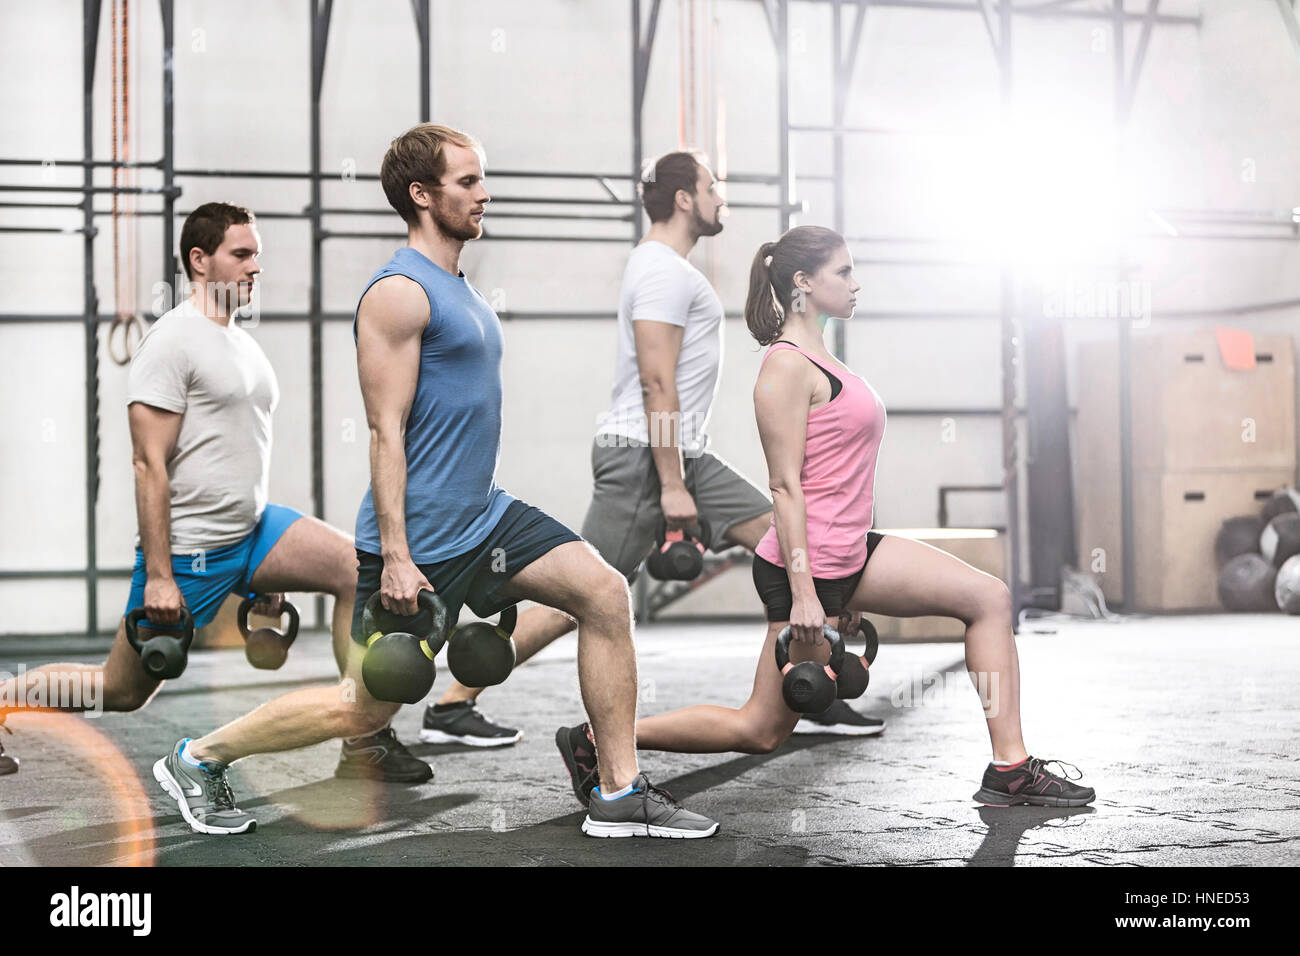 Determined people lifting kettlebells at crossfit gym Stock Photo